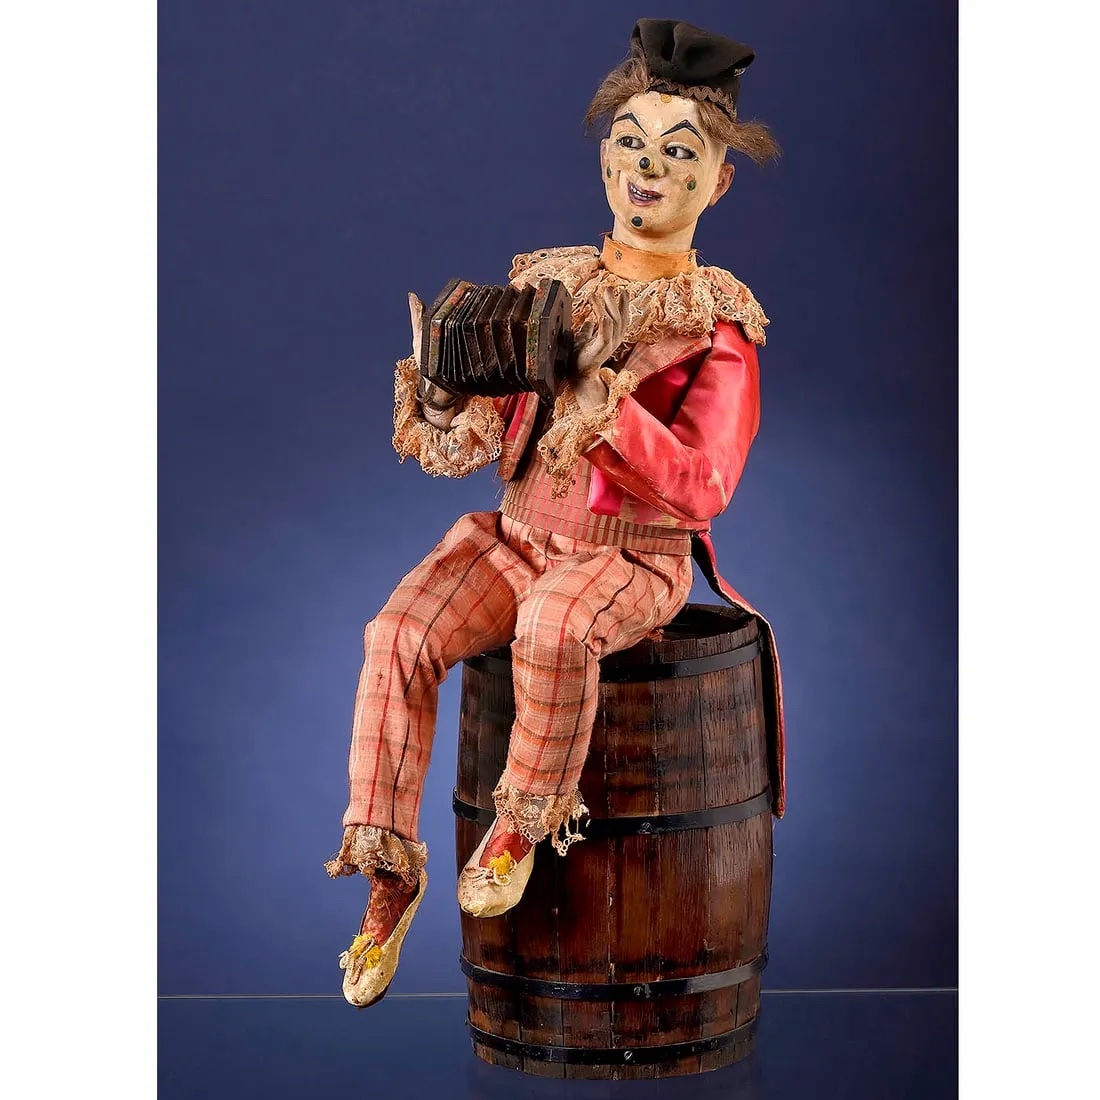 Claude the Clown automaton, estimated at €18,000-€25,000 ($19,555-$27,160) at Breker.